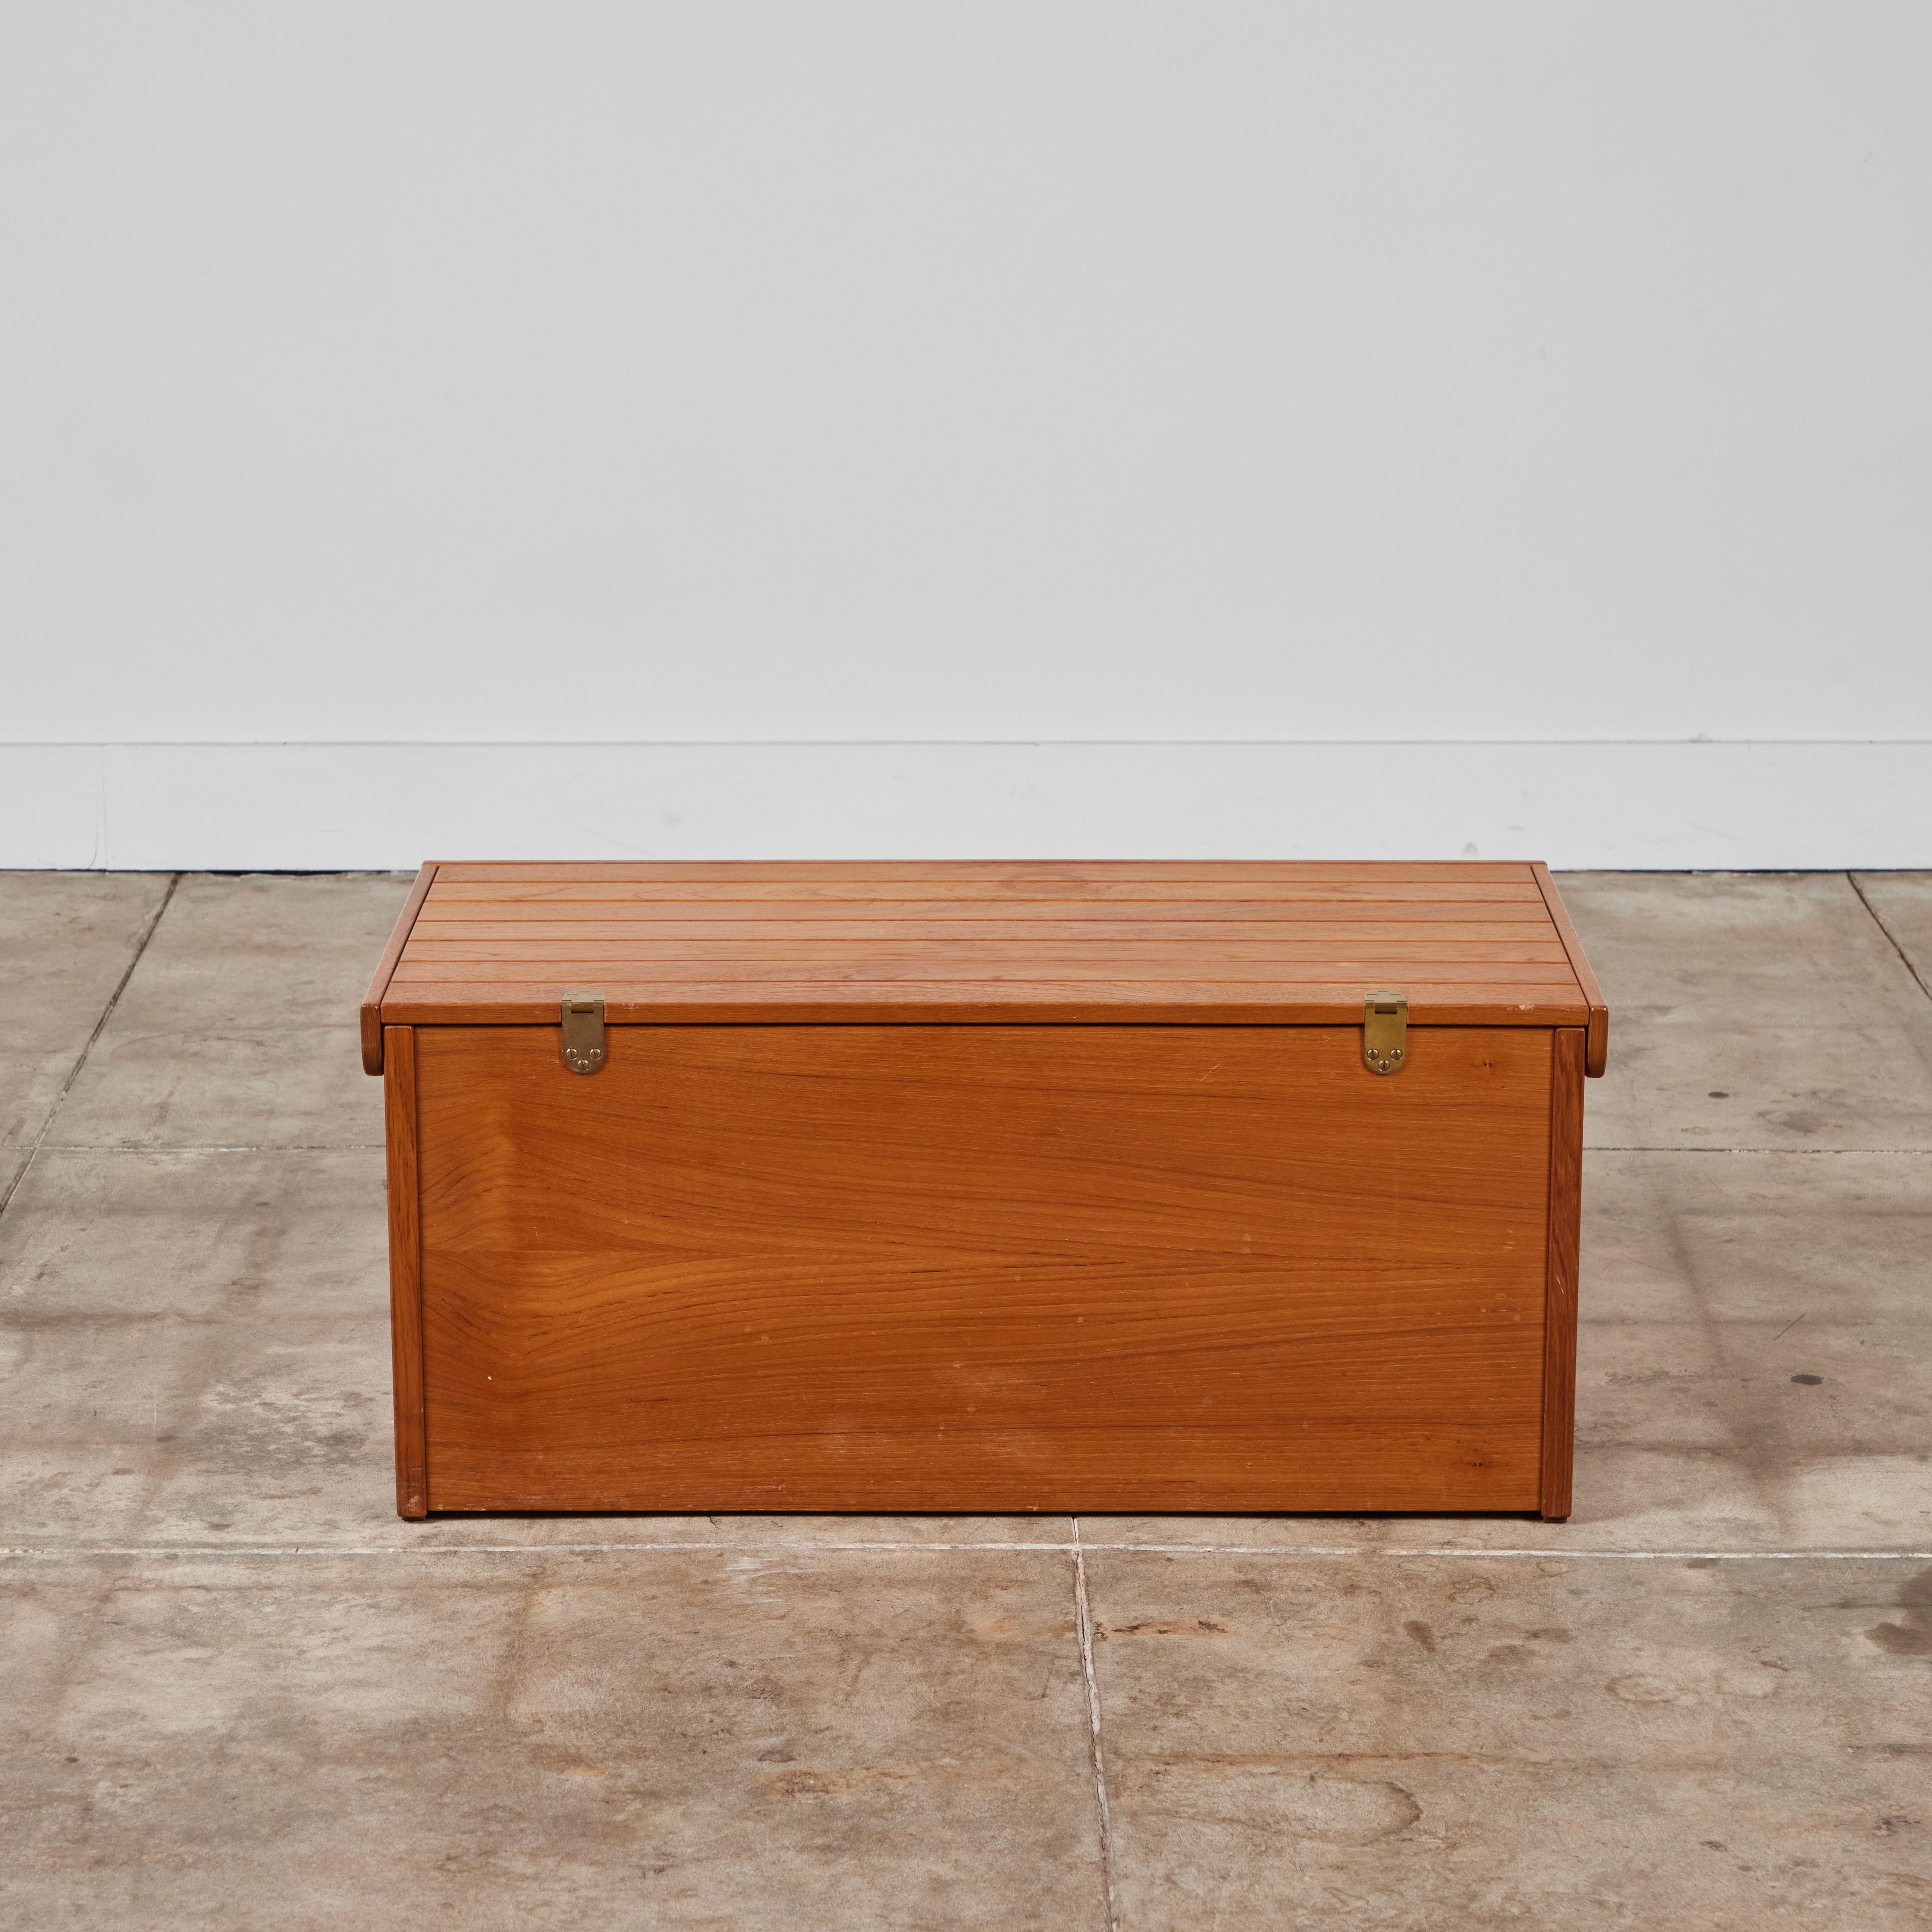 Kai Kristiansen Storage Chest Trunk for Aksel Kjersgaard In Good Condition For Sale In Los Angeles, CA